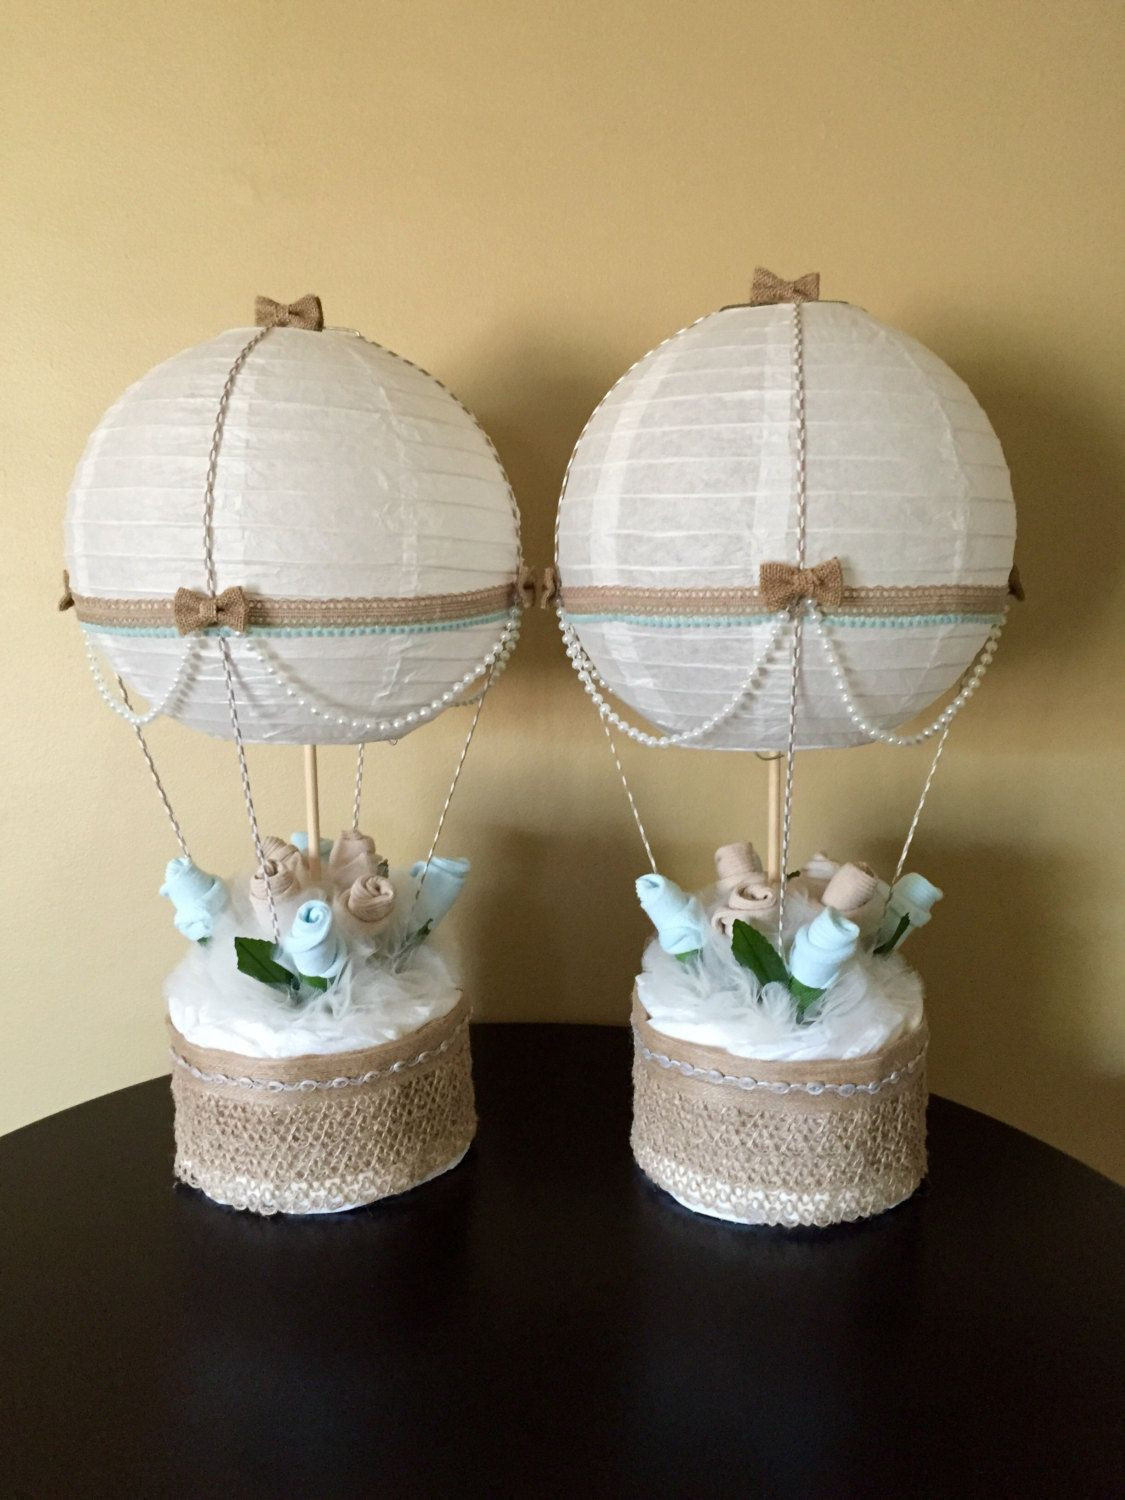 Decorating Ideas For Baby Shower Gift Table
 Hot Air Balloon Baby Shower Table Centerpiece by